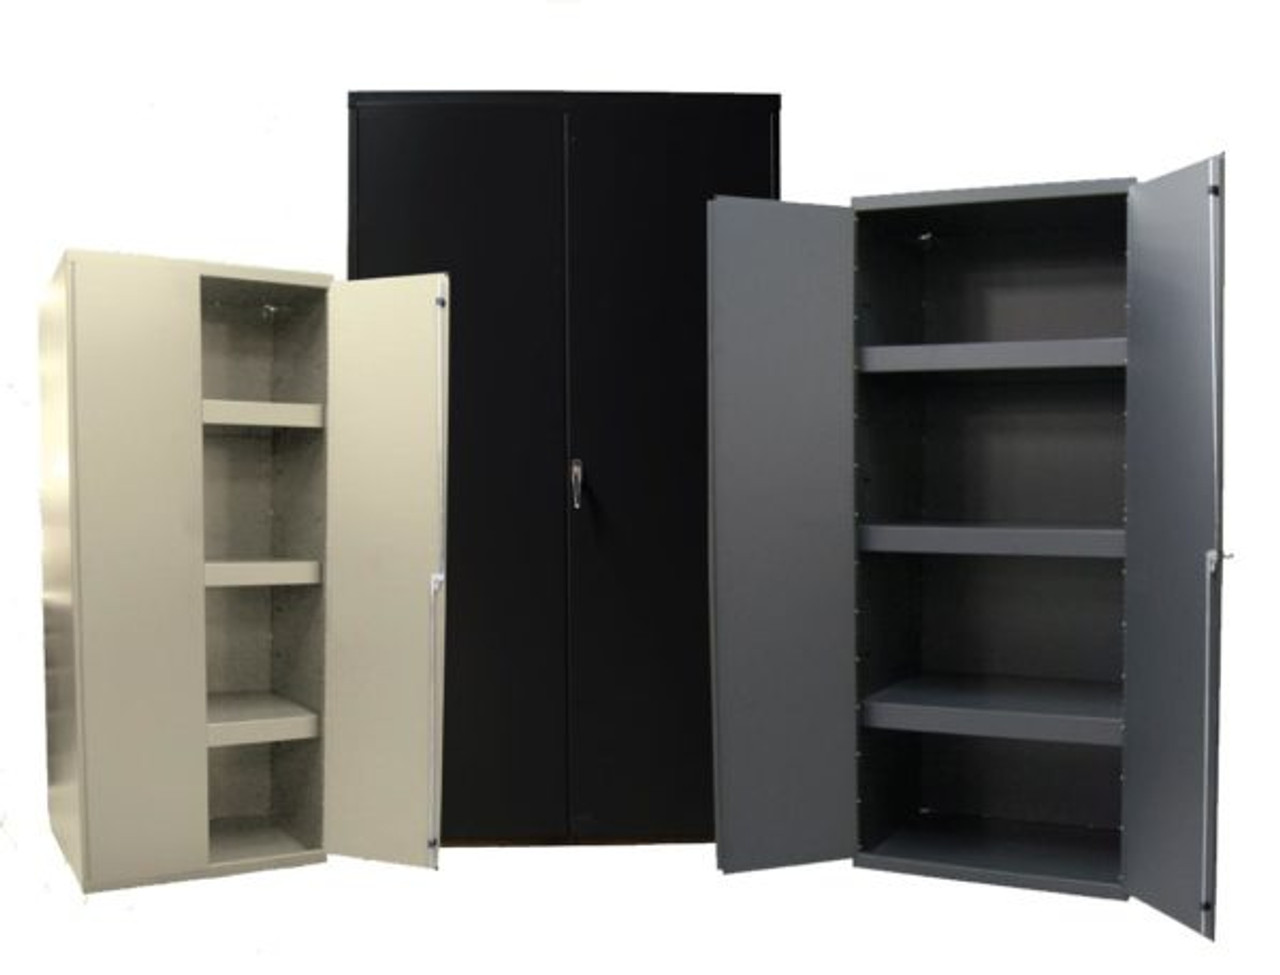 Valley Craft Electronic Locking Cabinet 48"W X 24"D X 72"H, Smoke Gray - includes 3 Shelves (CALL FOR BEST PRICING)